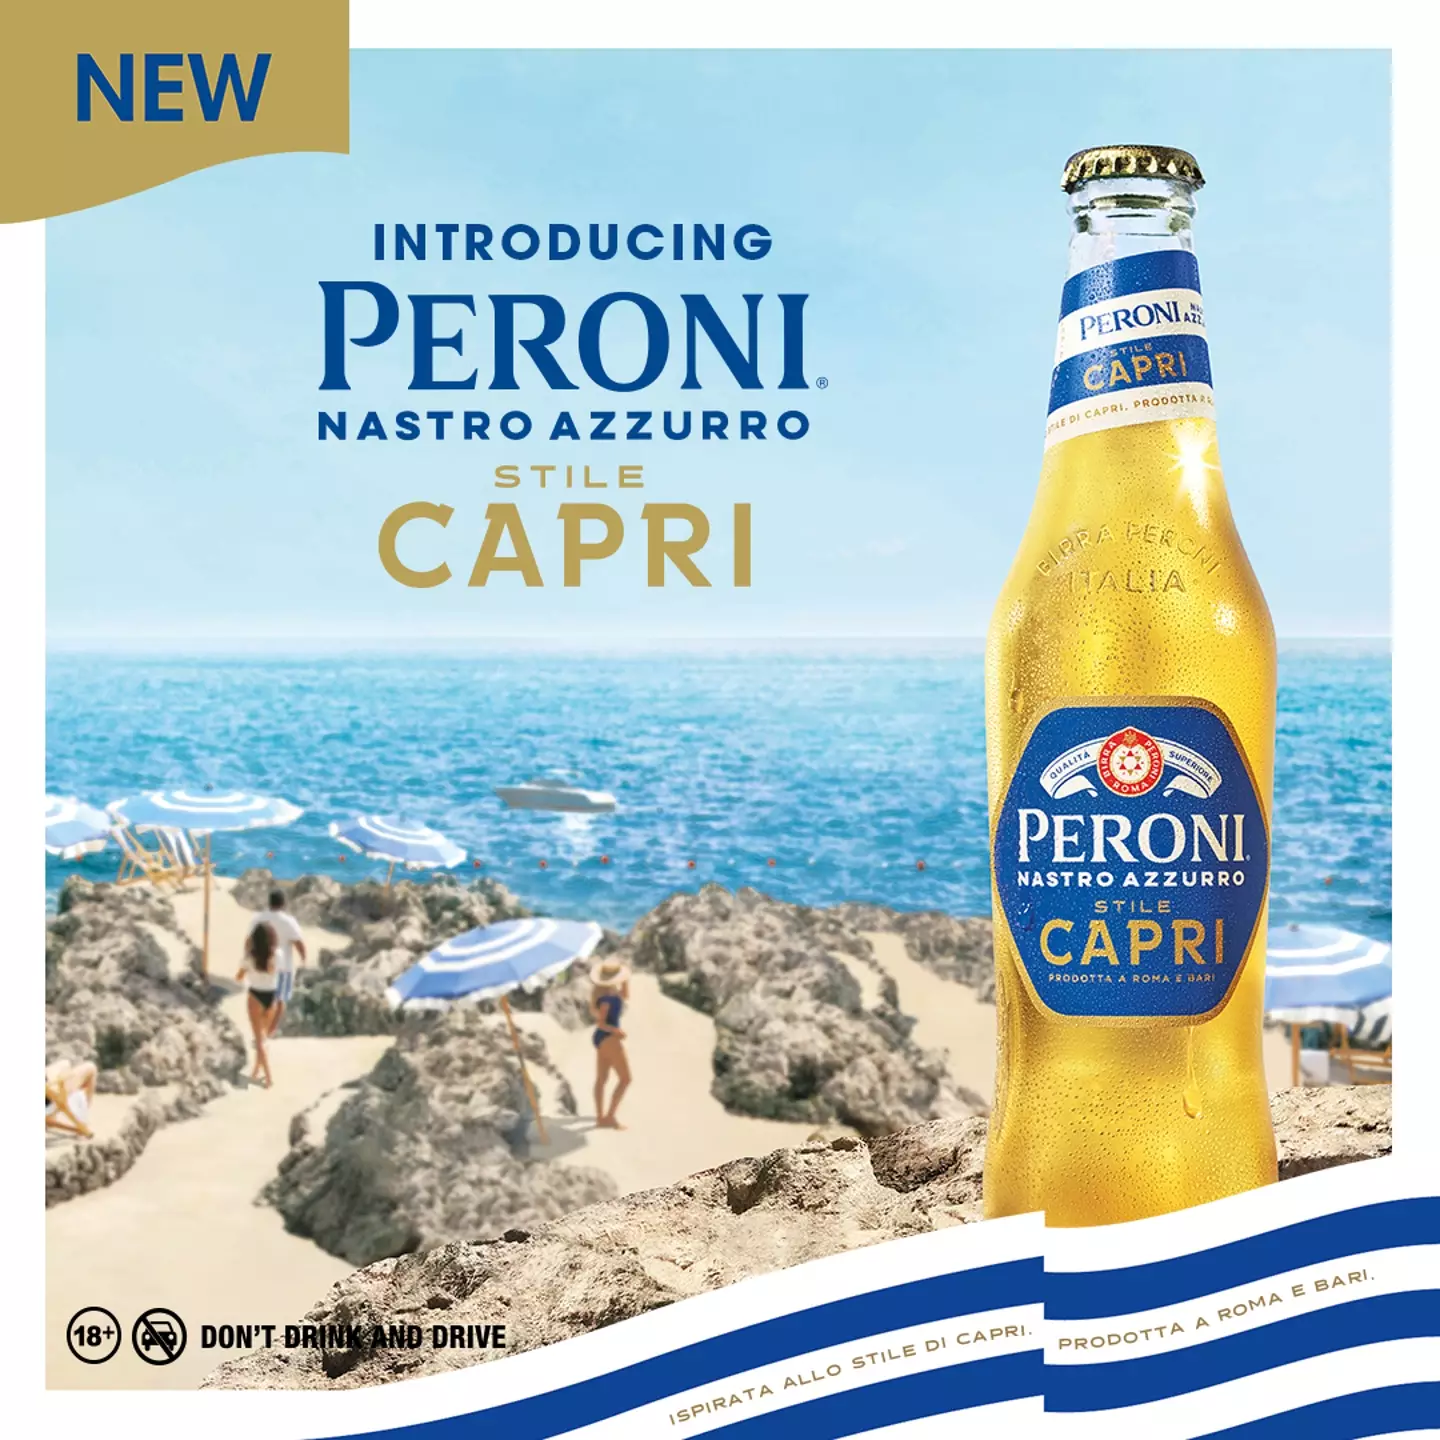 The new Peroni beer is set to launch later this month.